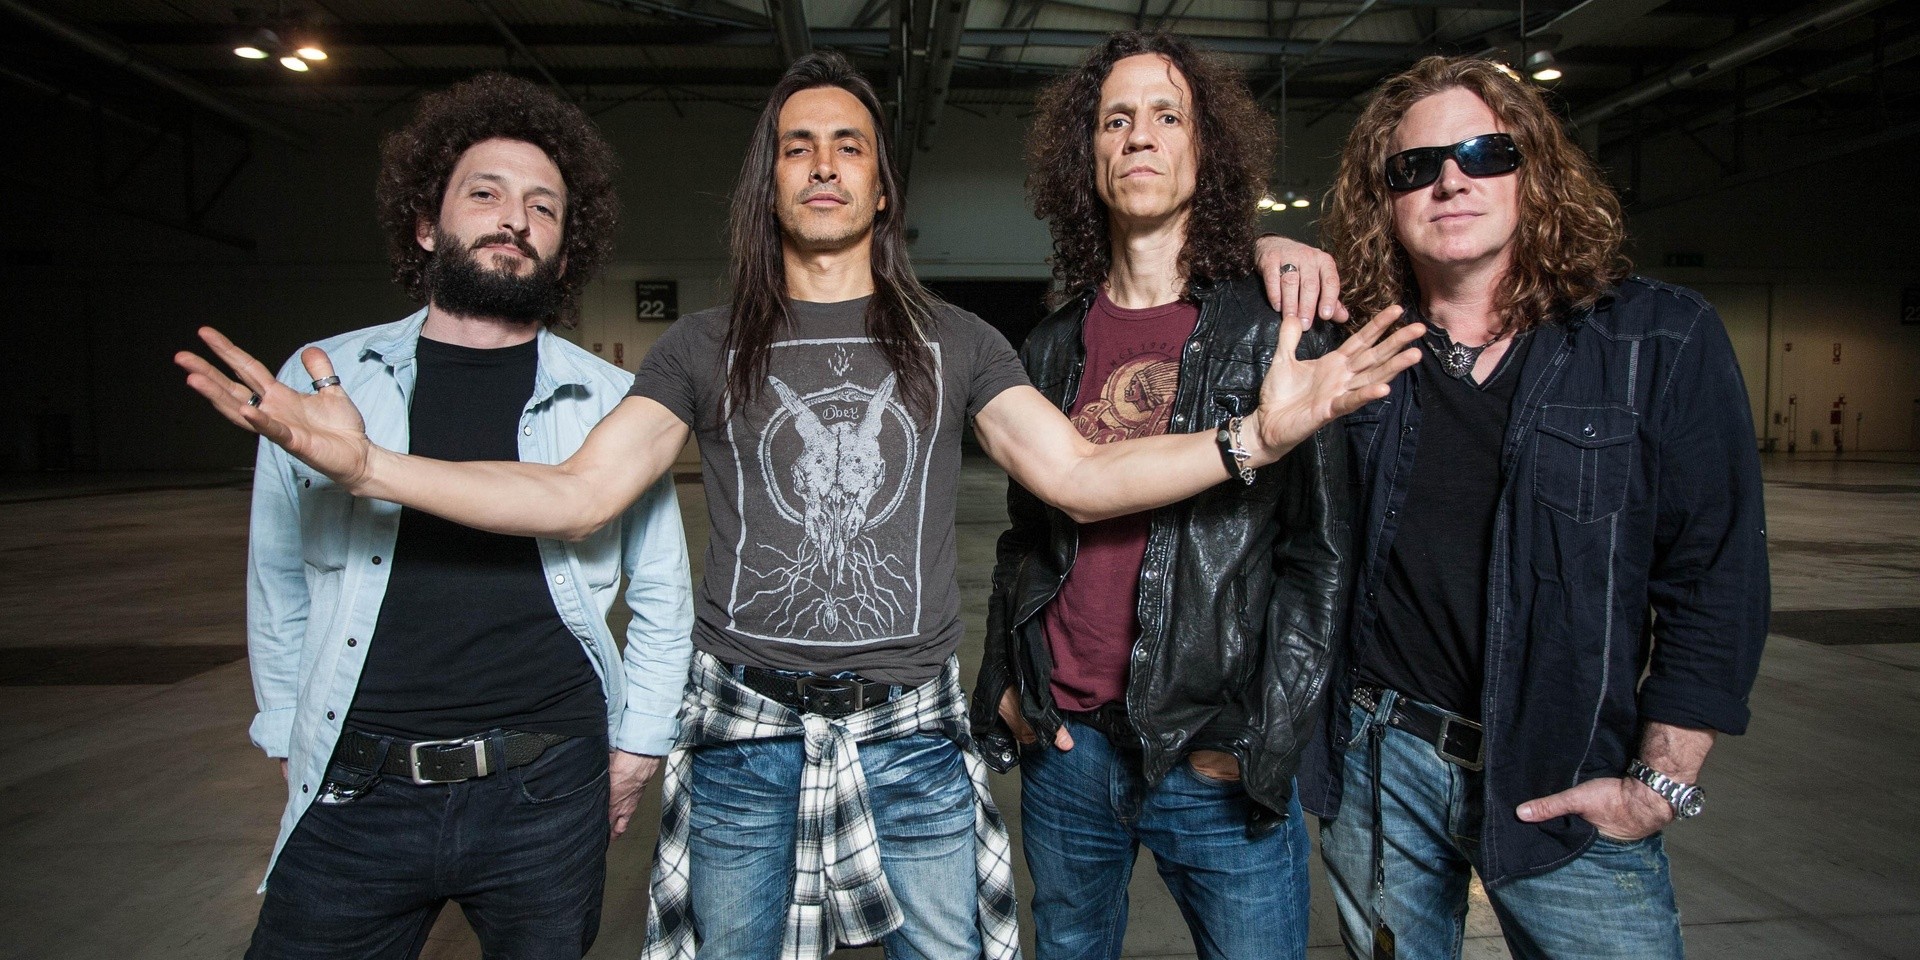 Guitarist Nuno Bettencourt looks back on Extreme’s discography